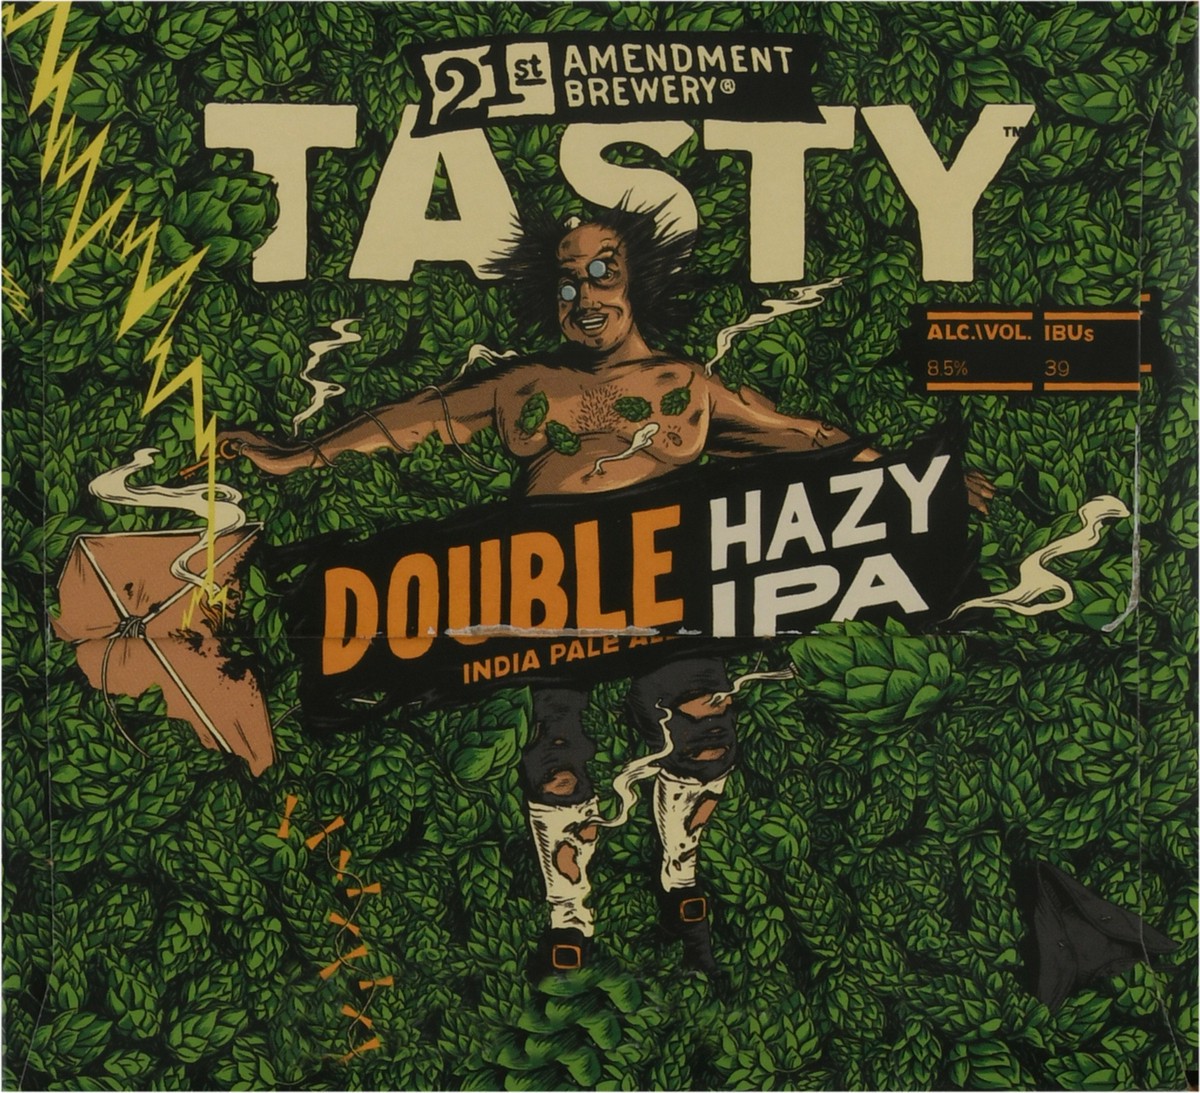 slide 8 of 9, 21st Amendment Brewery Tasty Double Hazy IPA Beer 6-12 oz Cans, 6 ct